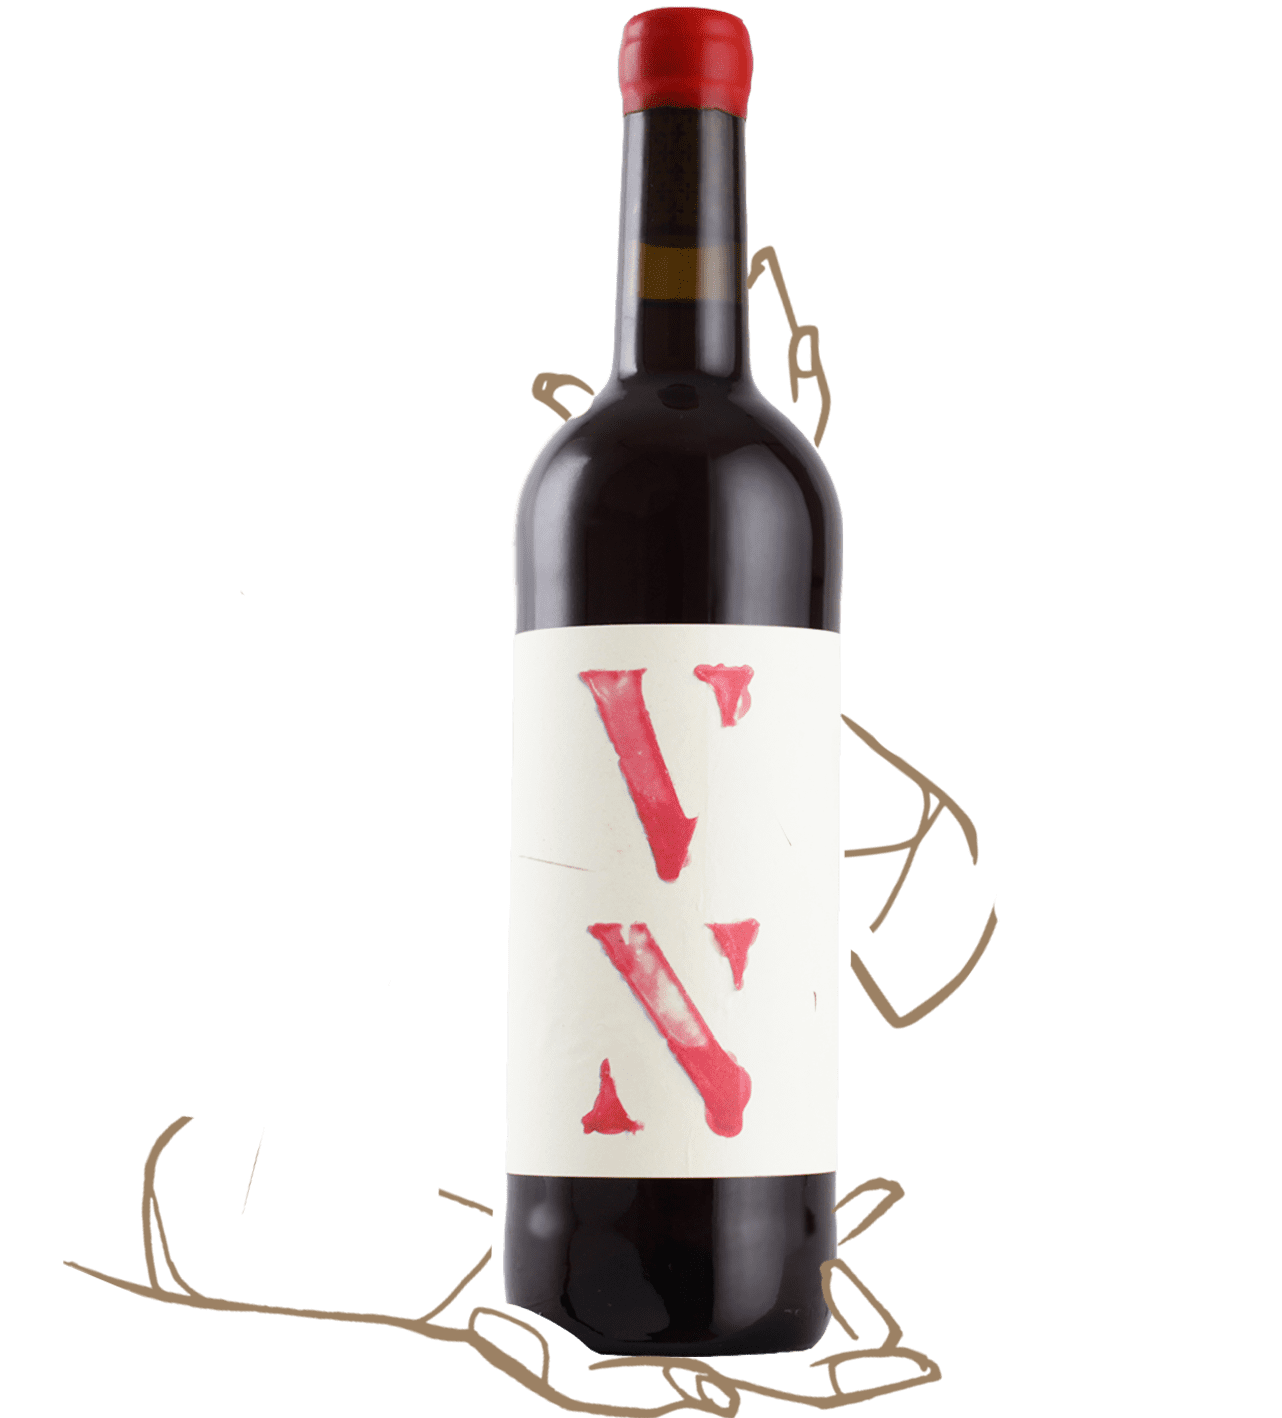 VN ROUGE by PARTIDA CREUS is a natural wine from spain